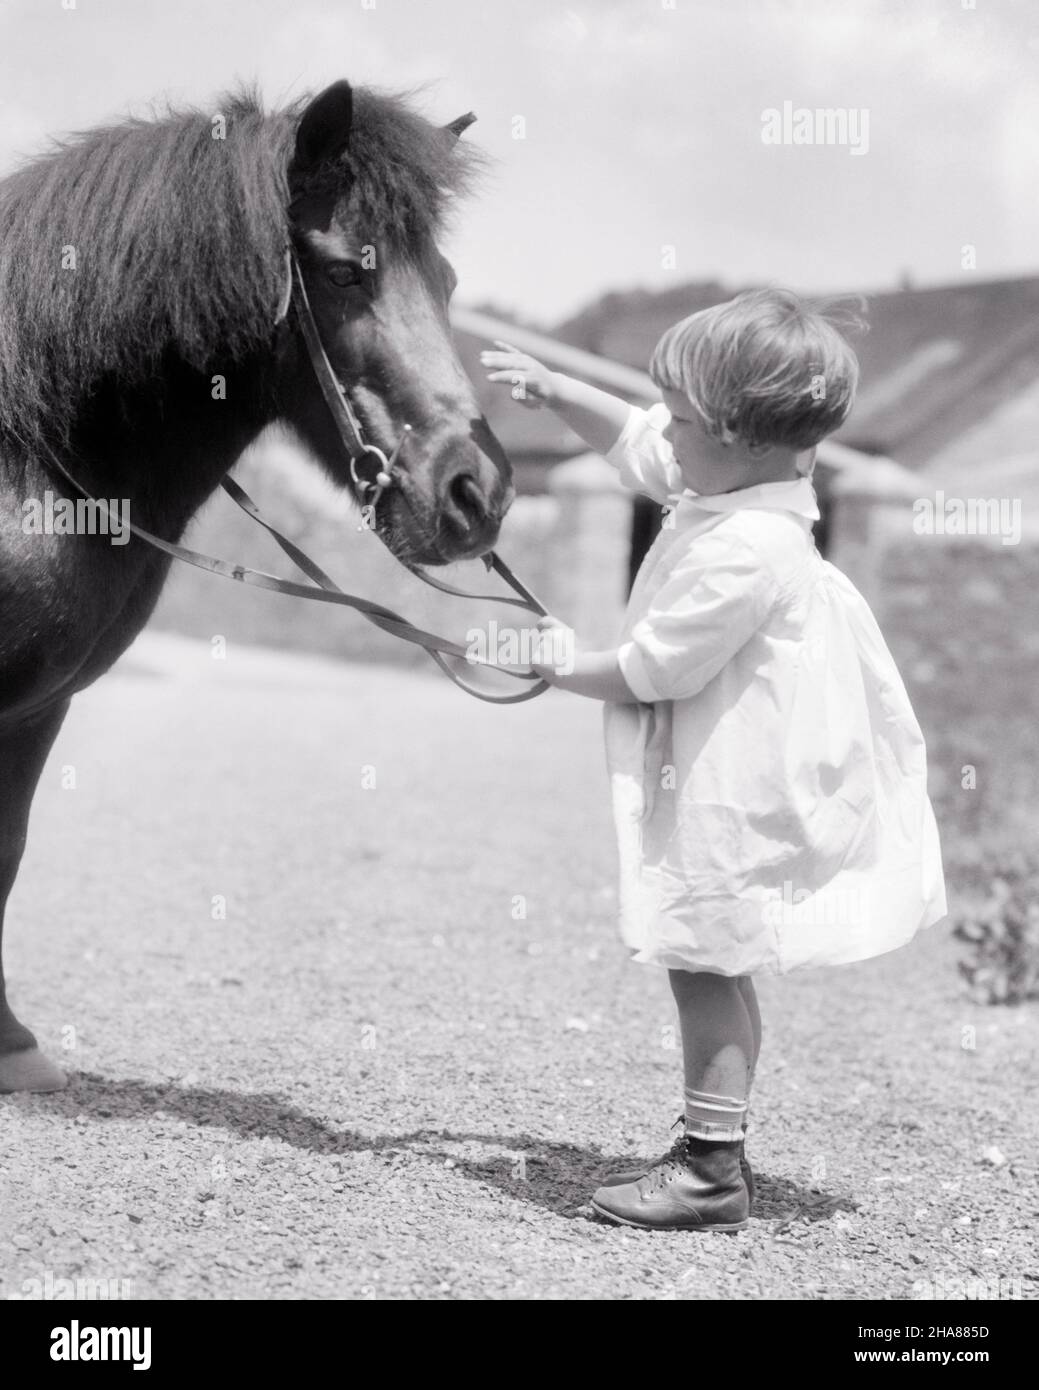 1920s CHARMING LITTLE BLOND GIRL WEARING WHITE COTTON DRESS HOLDING A FARM PONY’S REINS PETTING ITS NOSE - h1684 HAR001 HARS FARMING PONY CONFIDENCE B&W REINS HAPPINESS MAMMALS ADVENTURE DISCOVERY HIS CHOICE FARMERS RECREATION PETTING FEARLESS CONNECTION CONCEPTUAL CURIOUS FRIENDLY GROWTH JUVENILES MAMMAL TOGETHERNESS BLACK AND WHITE CAUCASIAN ETHNICITY HAR001 OLD FASHIONED Stock Photo